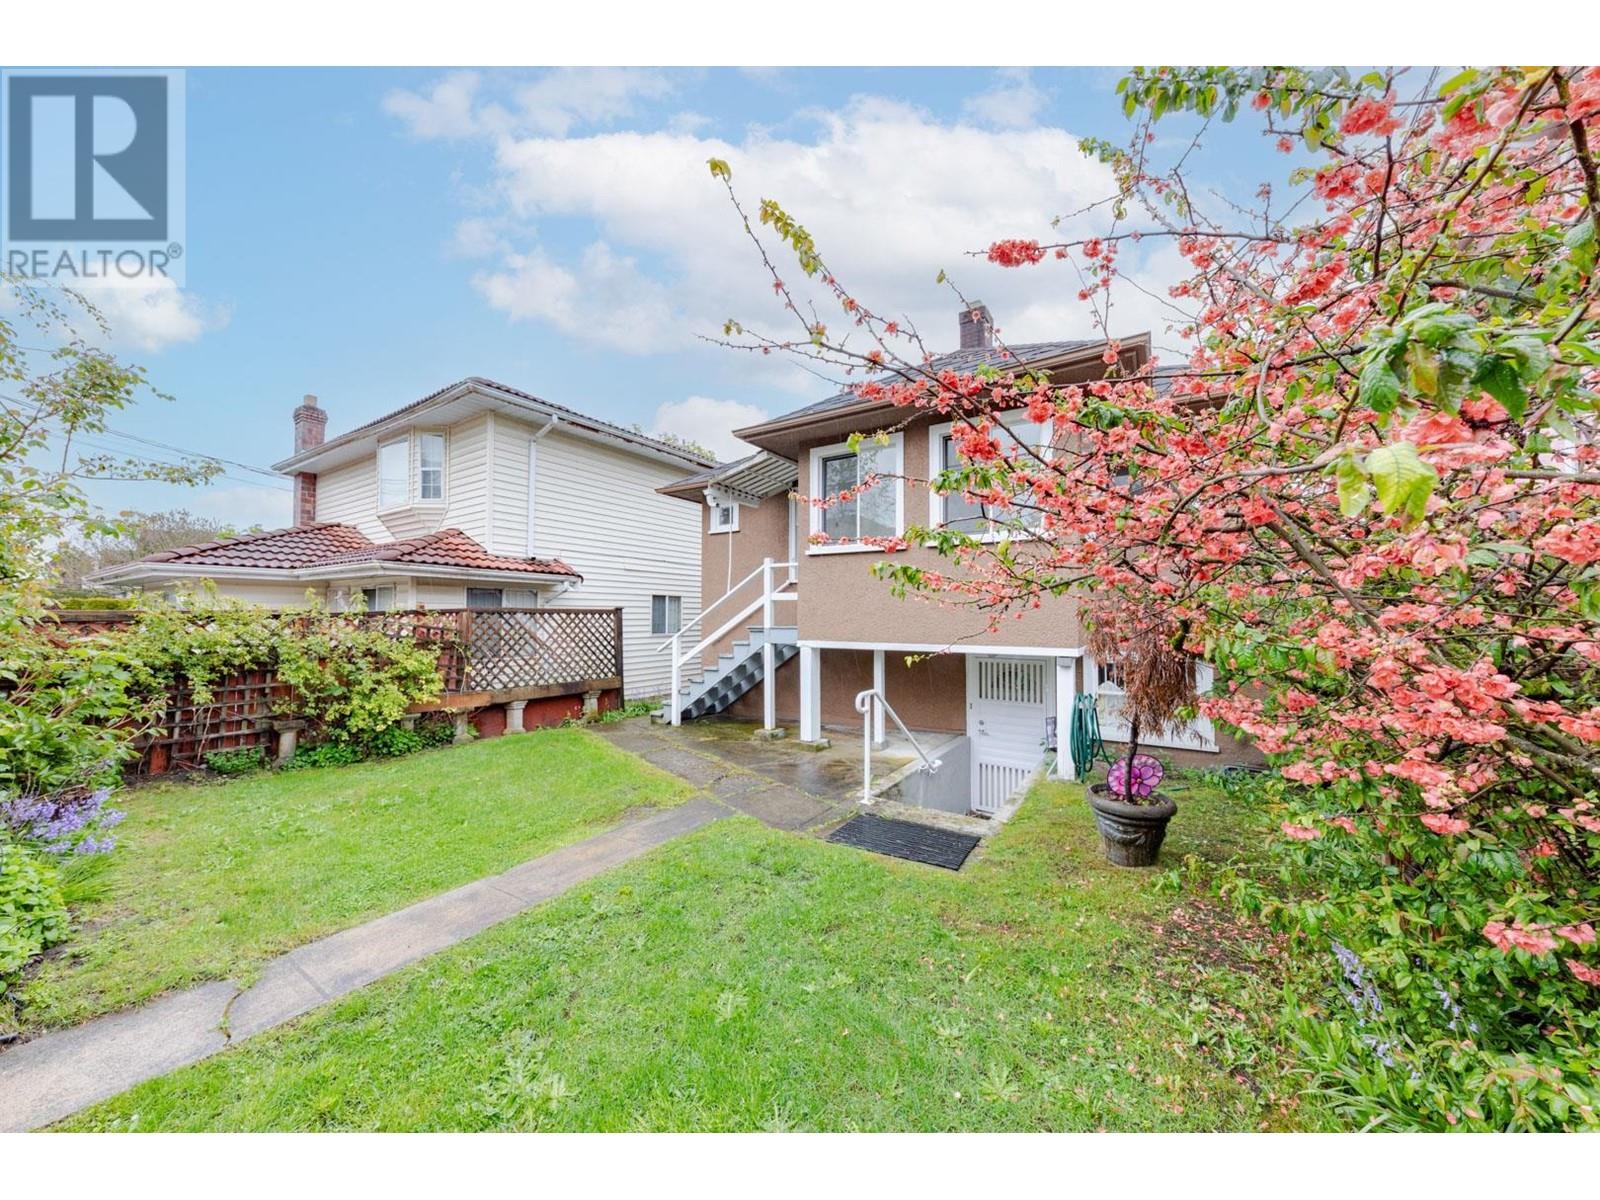 Listing Picture 8 of 37 : 1239 W 64TH AVENUE, Vancouver / 溫哥華 - 魯藝地產 Yvonne Lu Group - MLS Medallion Club Member